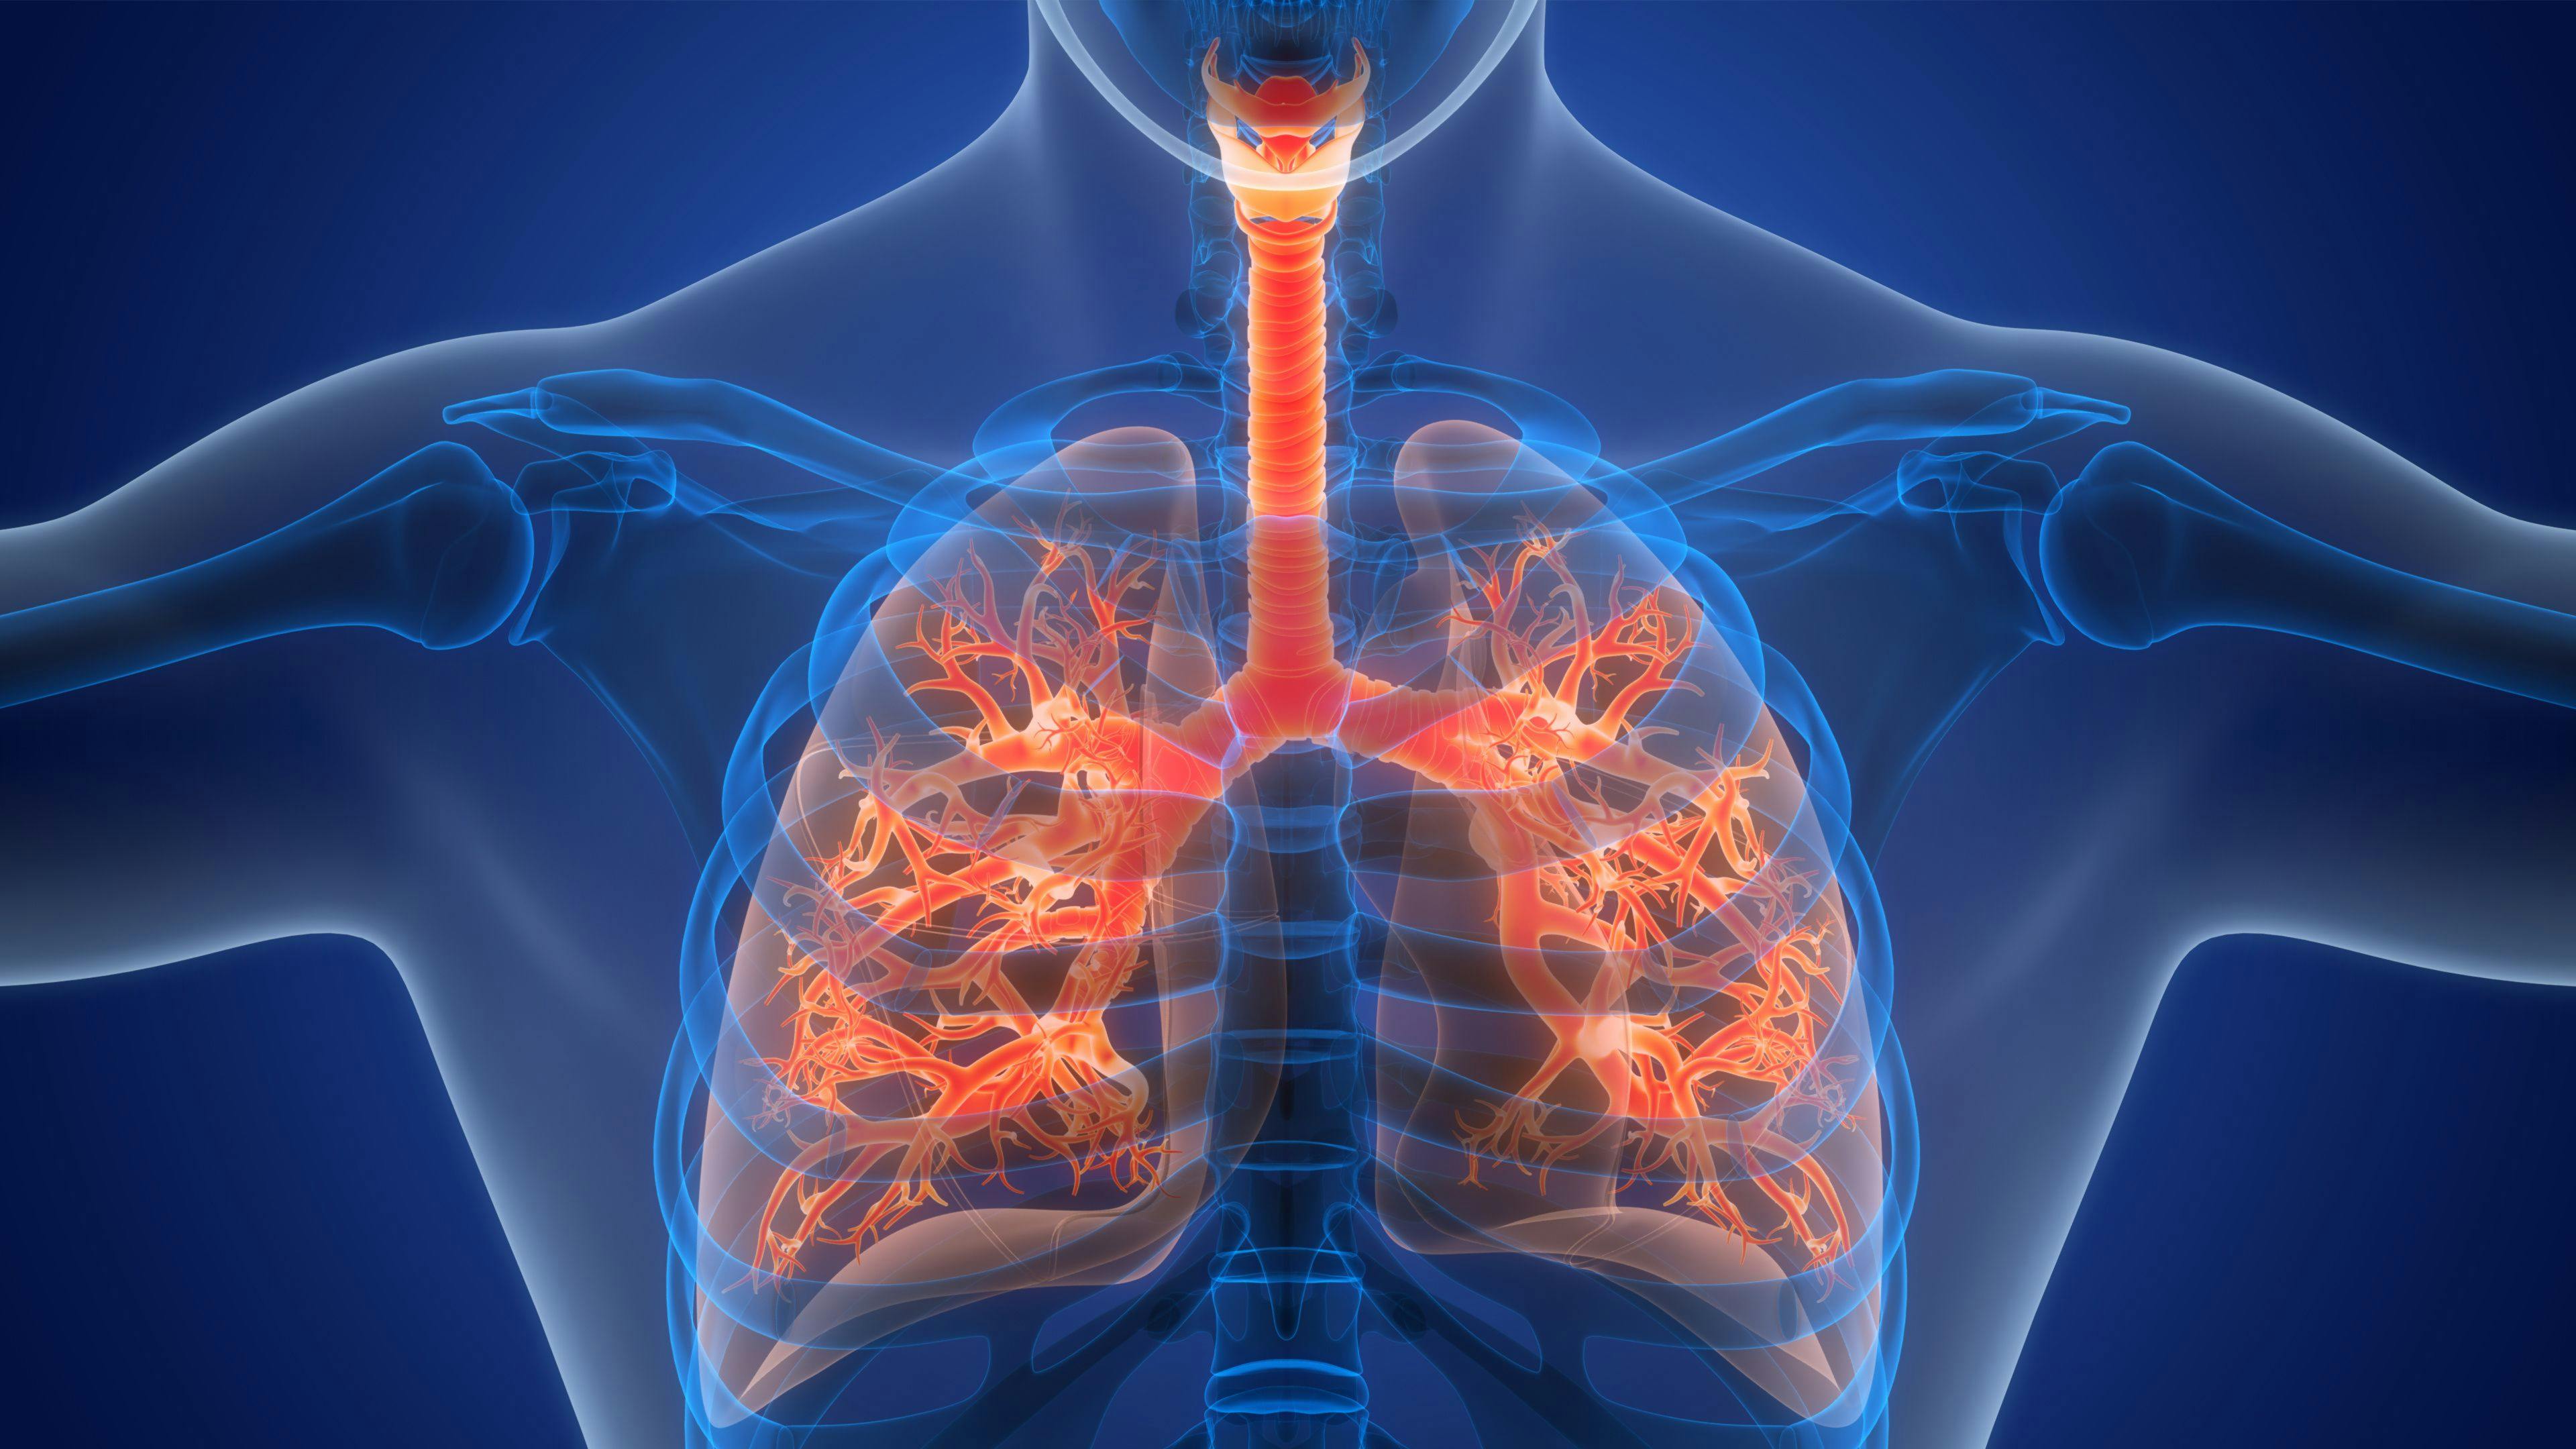 X-ray of lungs with asthma -- Image credit: magicmine | stock.adobe.com